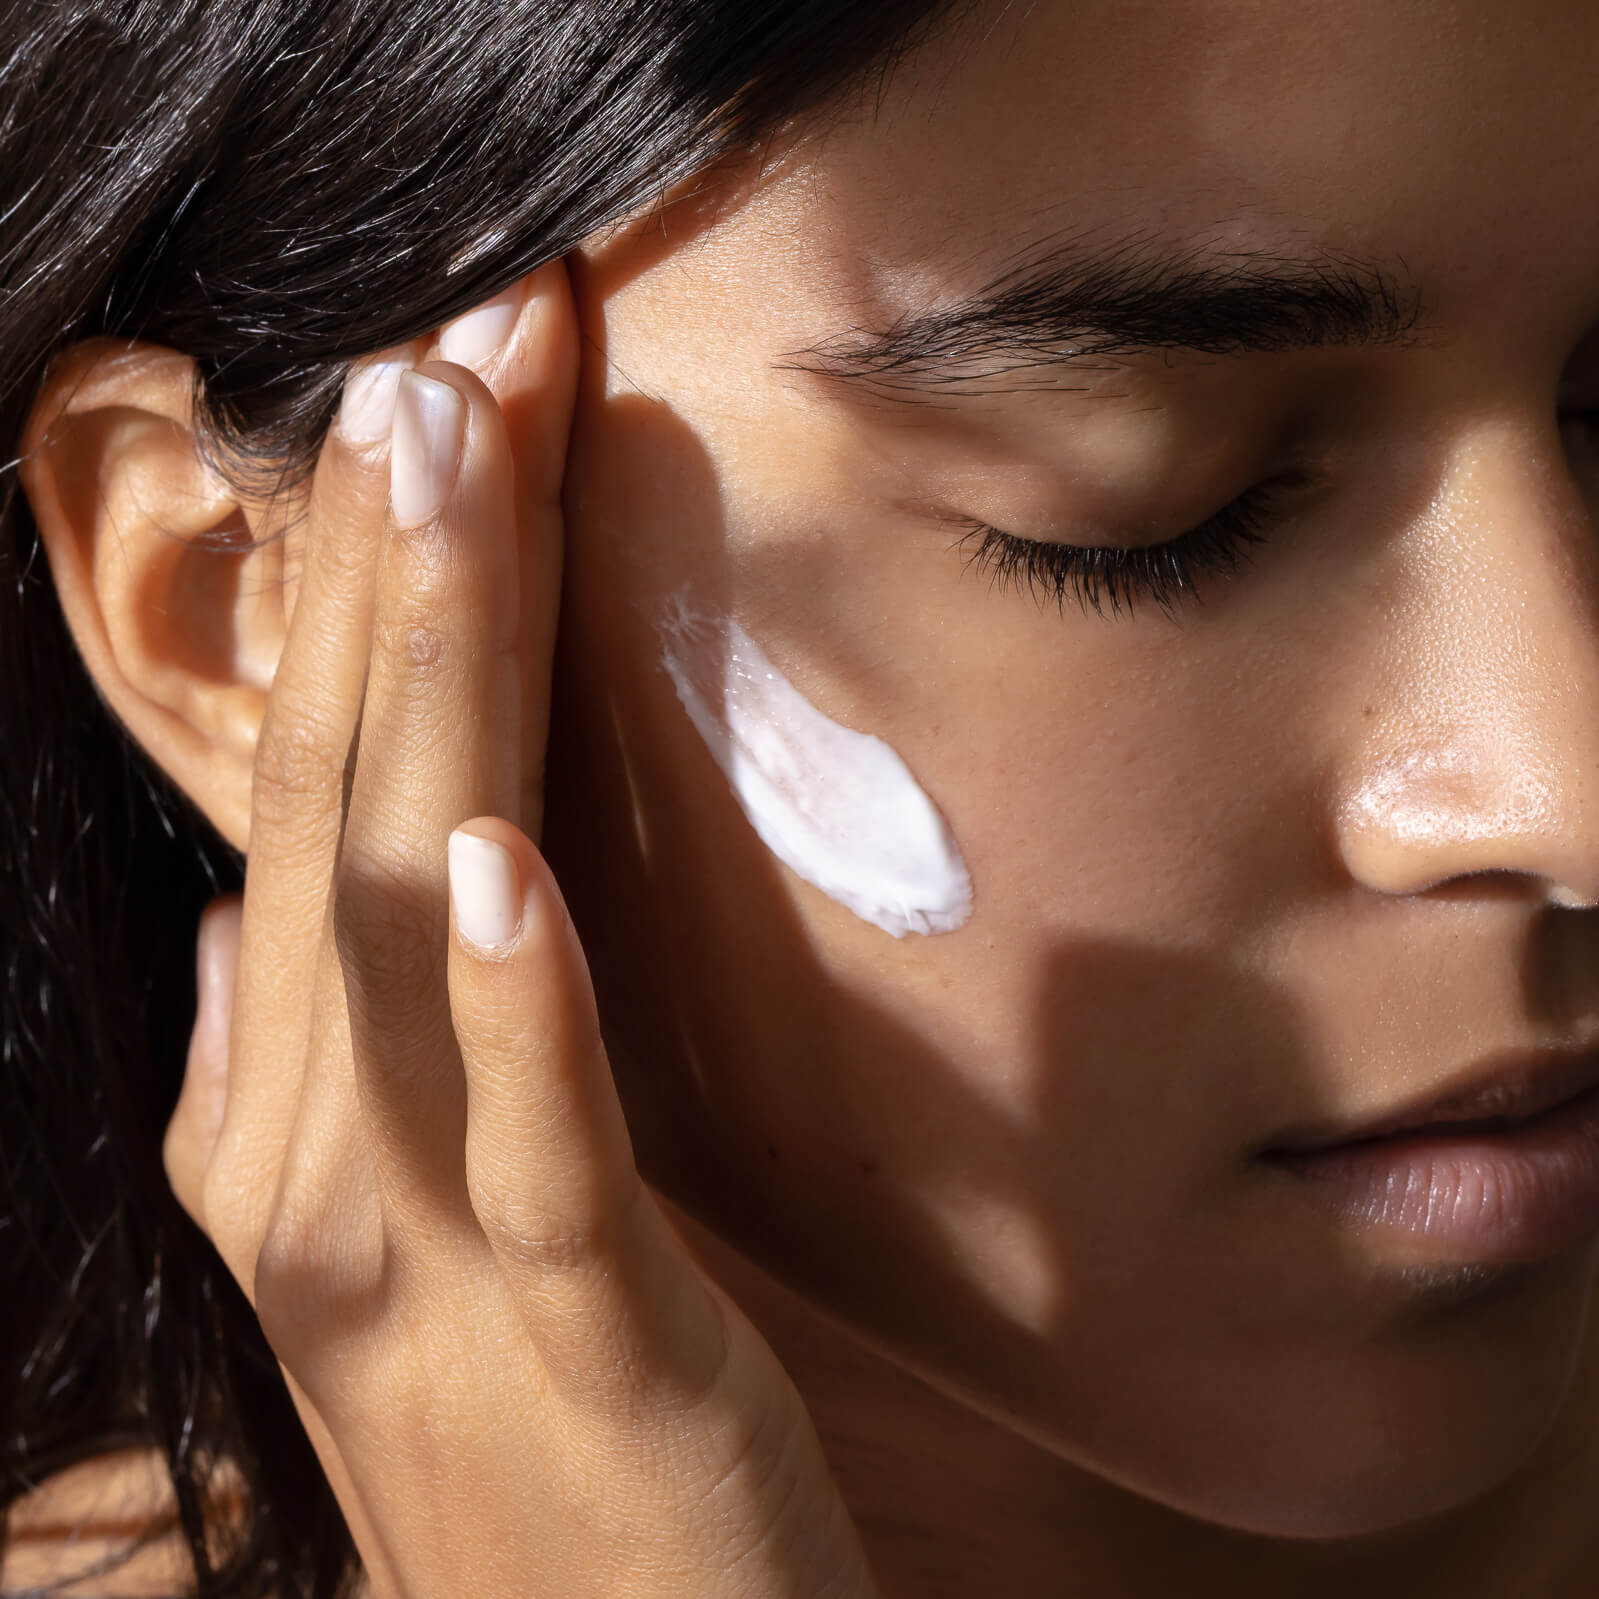 A soft touch: Hydrate your moisture-starved skin